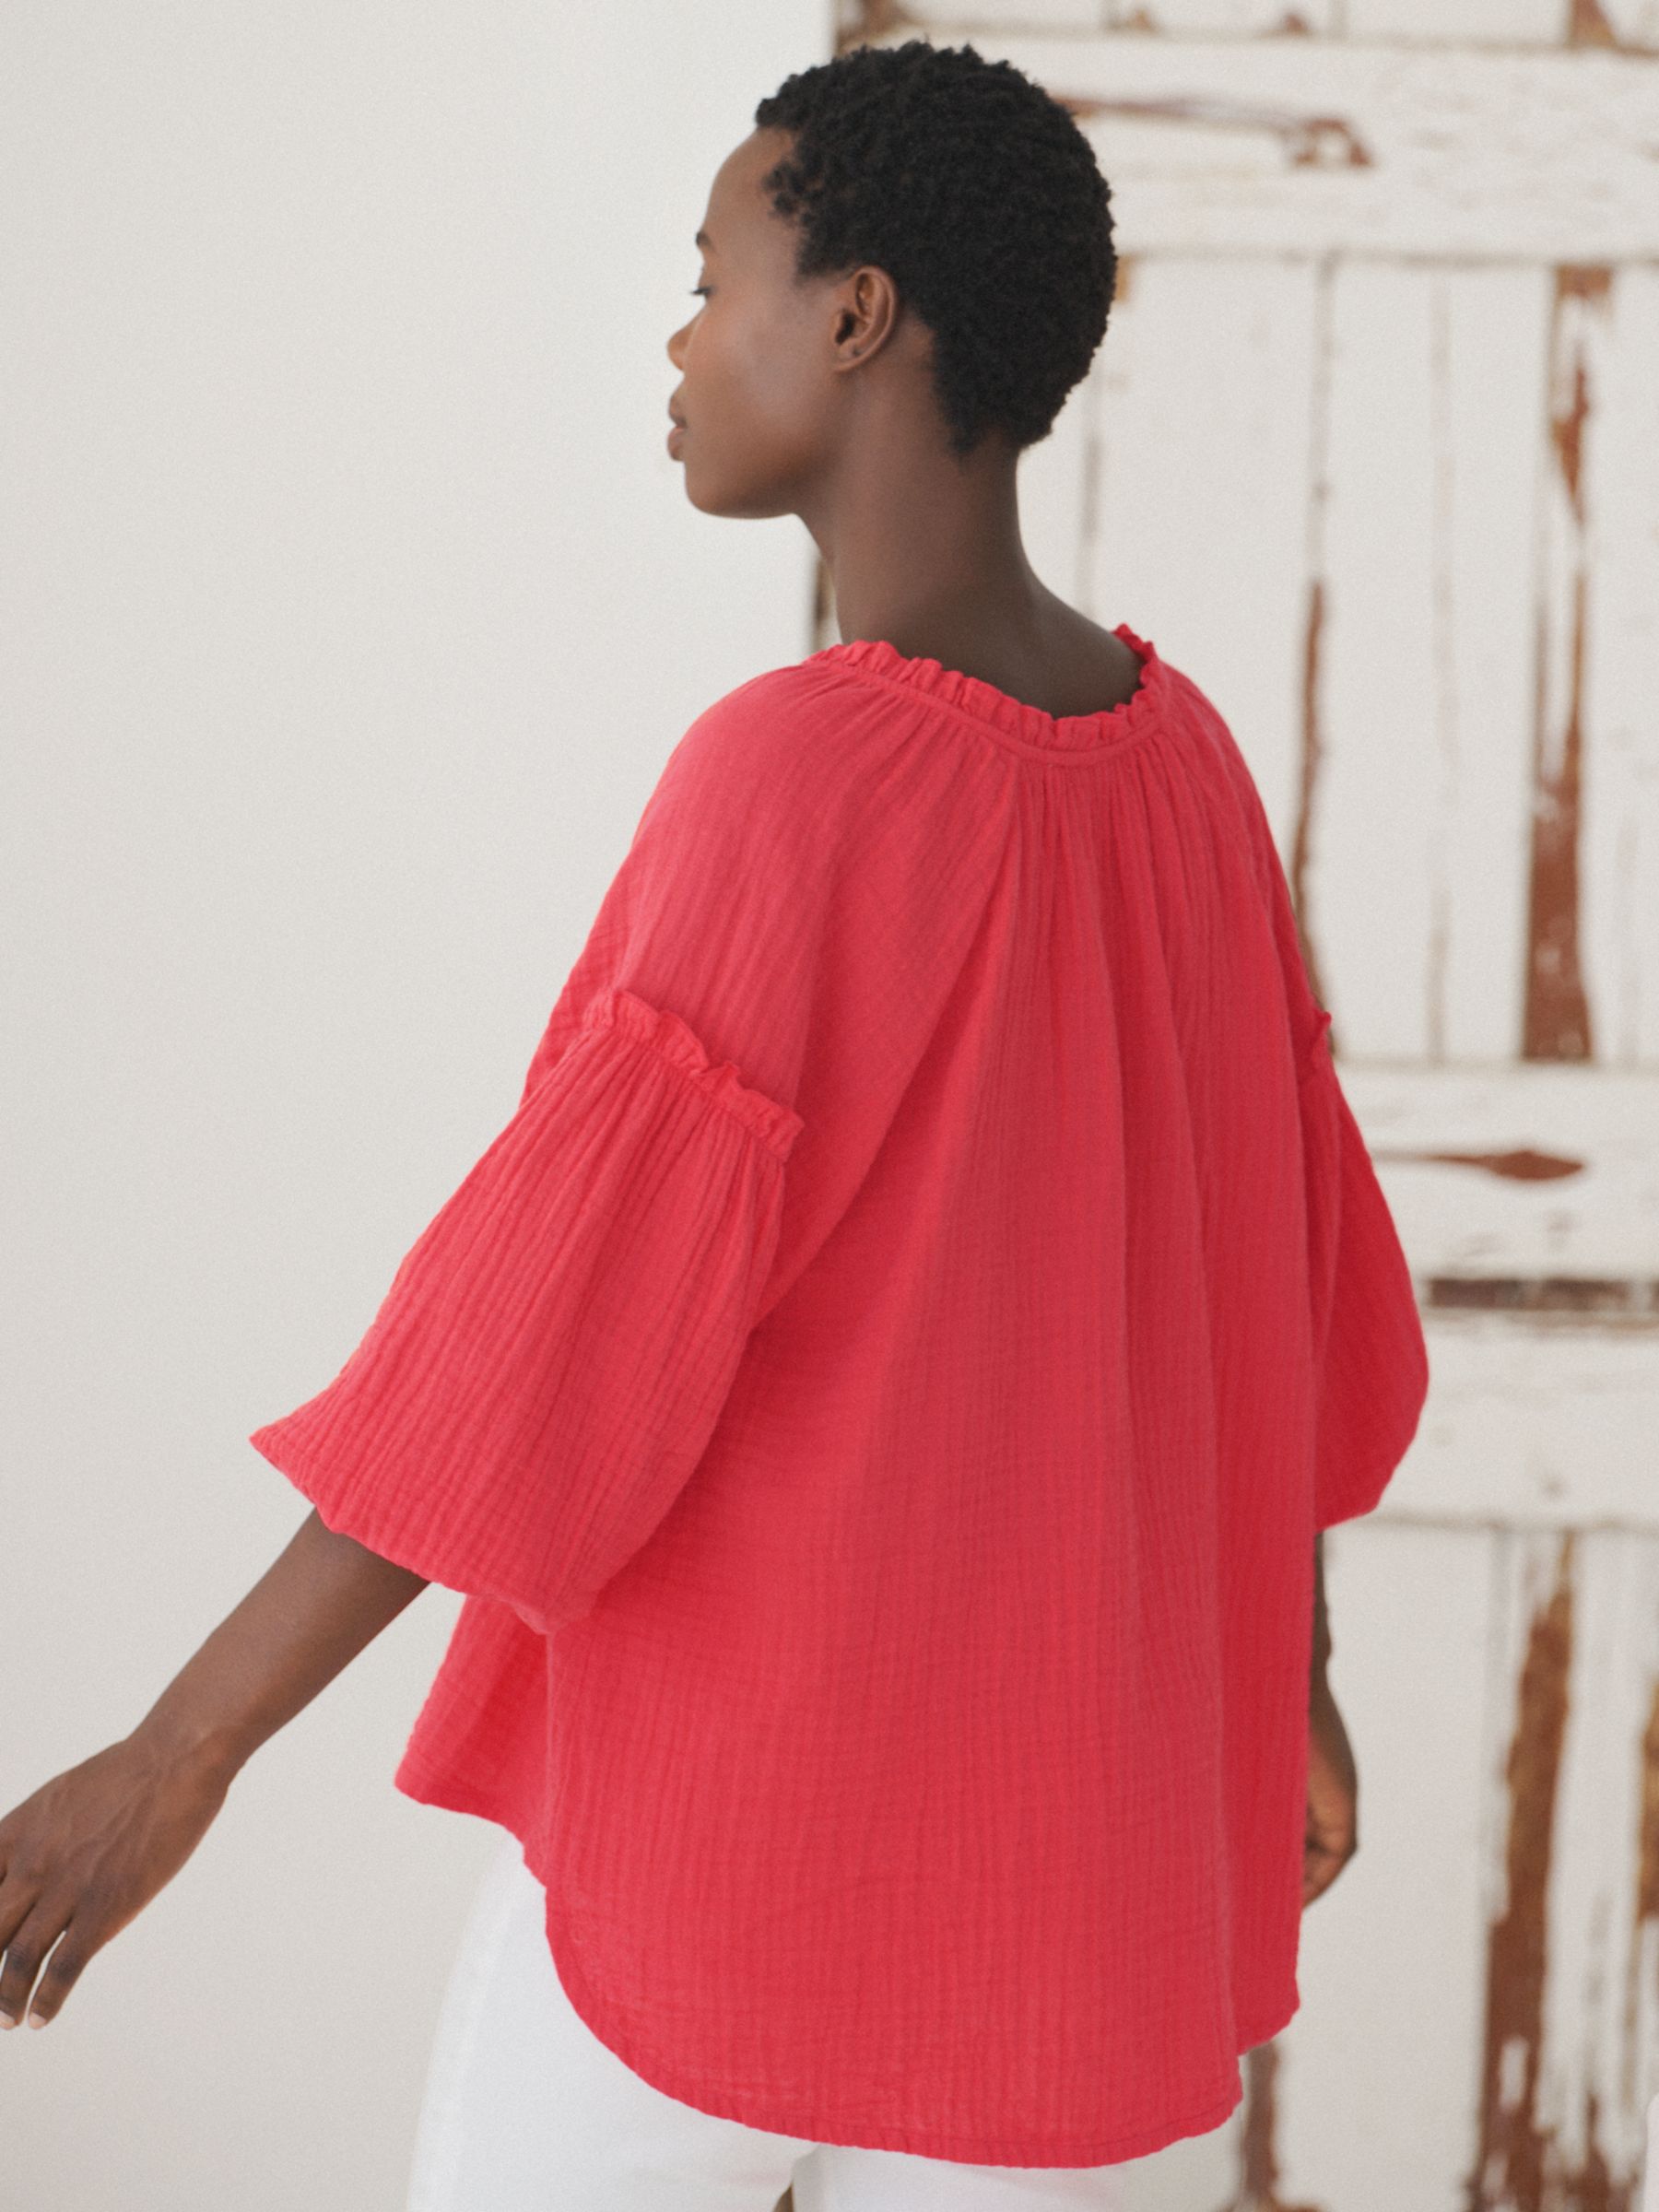 Buy NRBY Annabelle Double Gauze Cotton Frill Top, Hot Pink Online at johnlewis.com